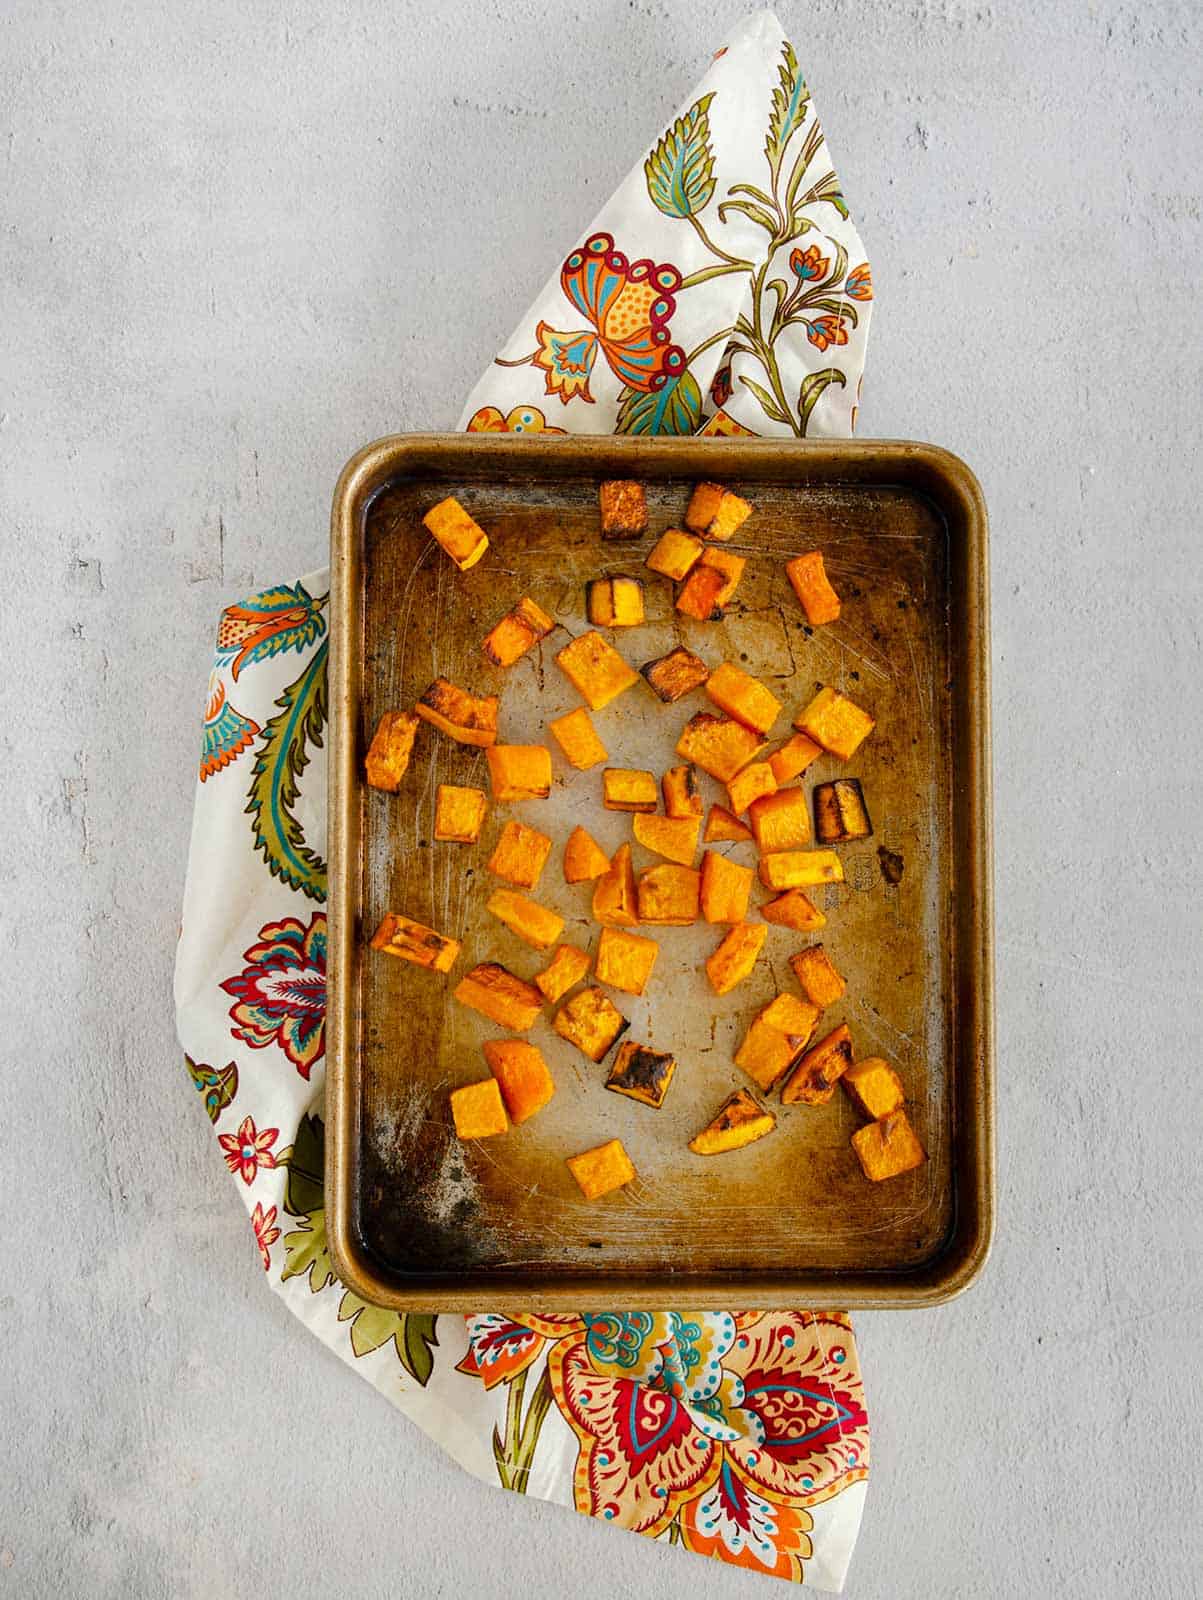 Roasted cubes of butternut squash on a baking sheet.